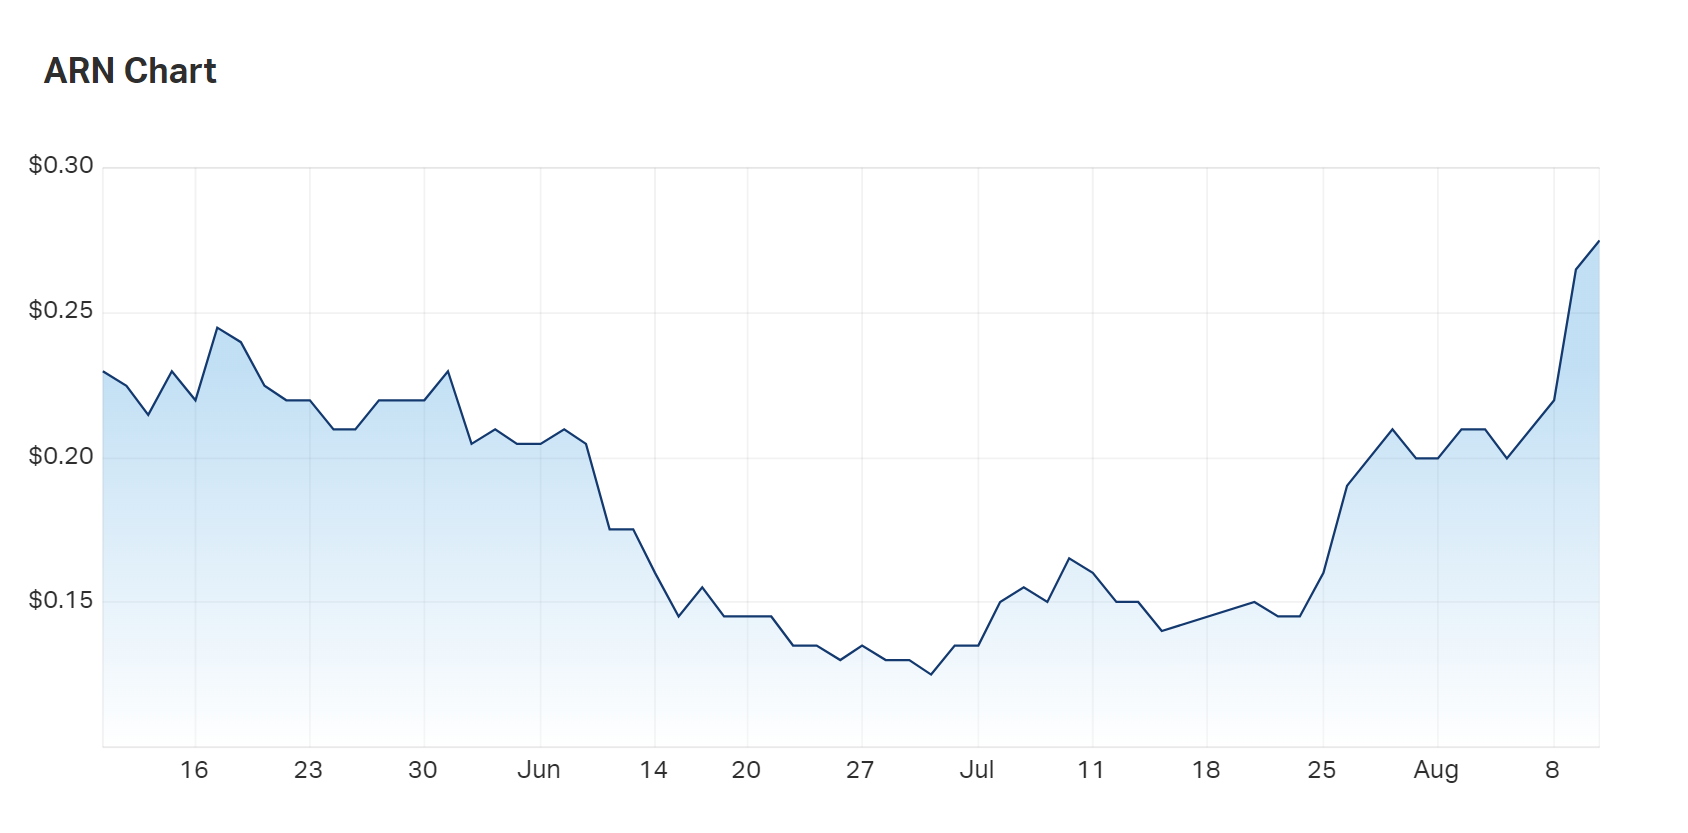 Aldoro's three month charts show the share price shaking off its all-year low in early July and heading back up